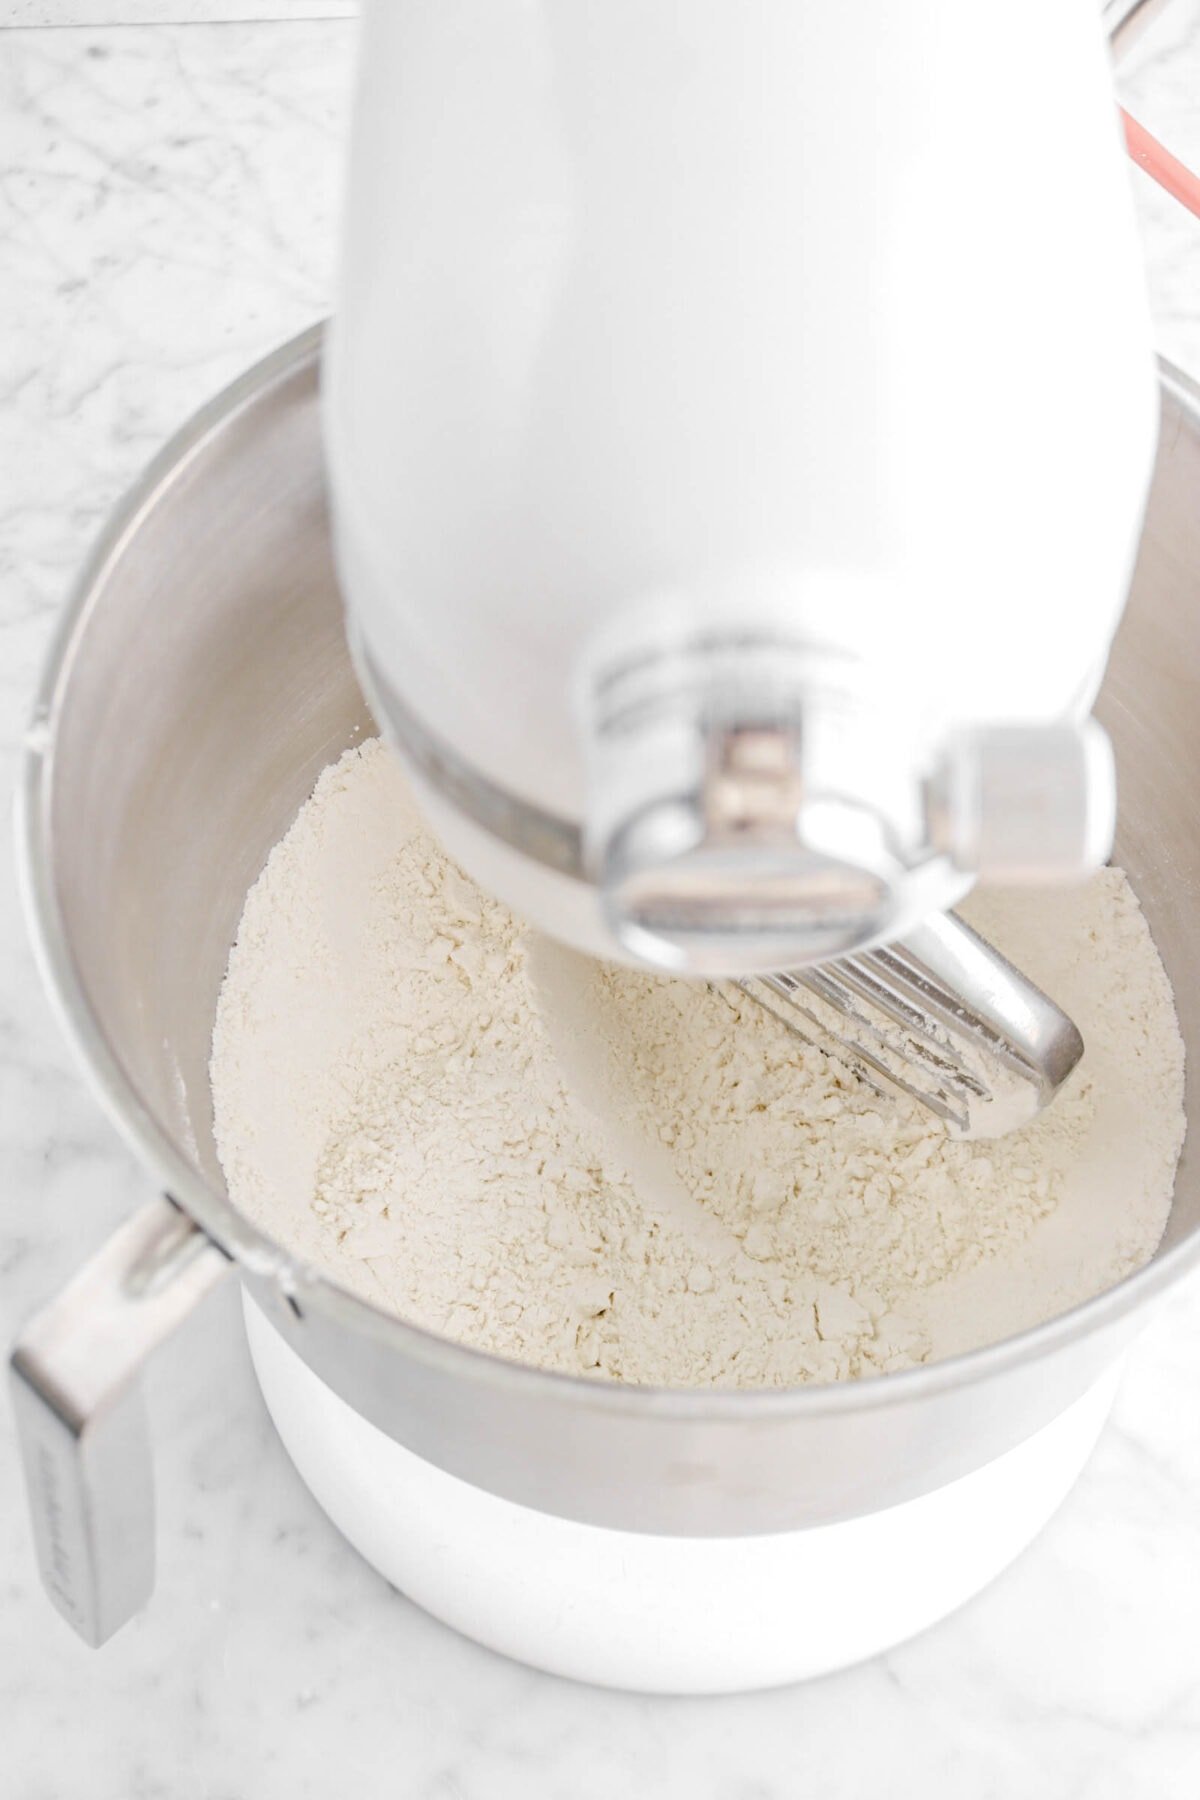 dry ingredients stirred together in mixer